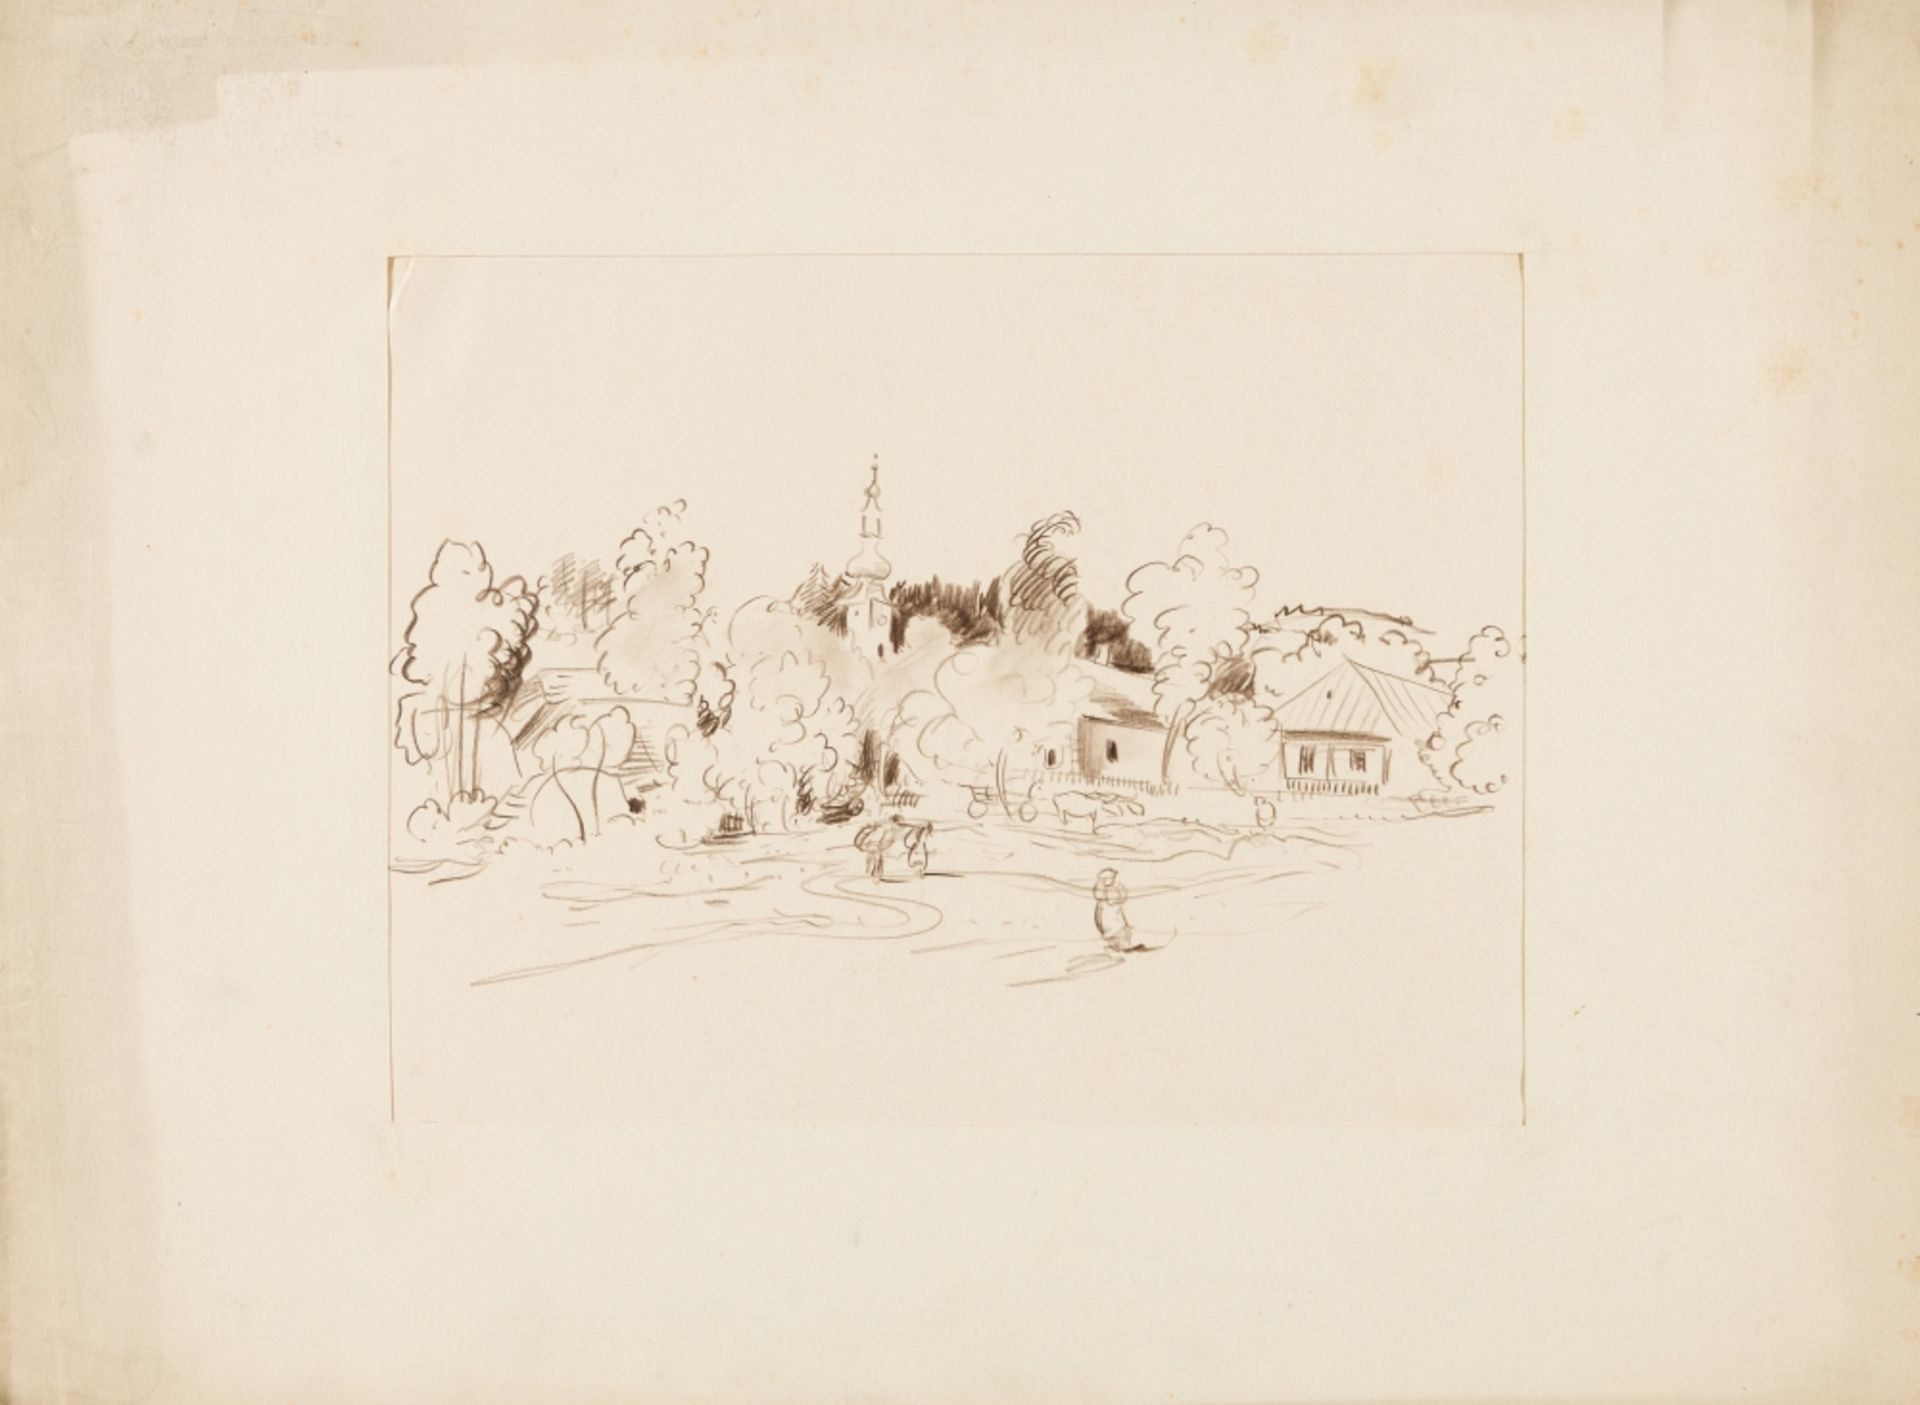 Mayer-Marton, Georg(1897 - 1960)Villagescapebrown charcoal on paper8,8 x 11,4 in - Image 3 of 3